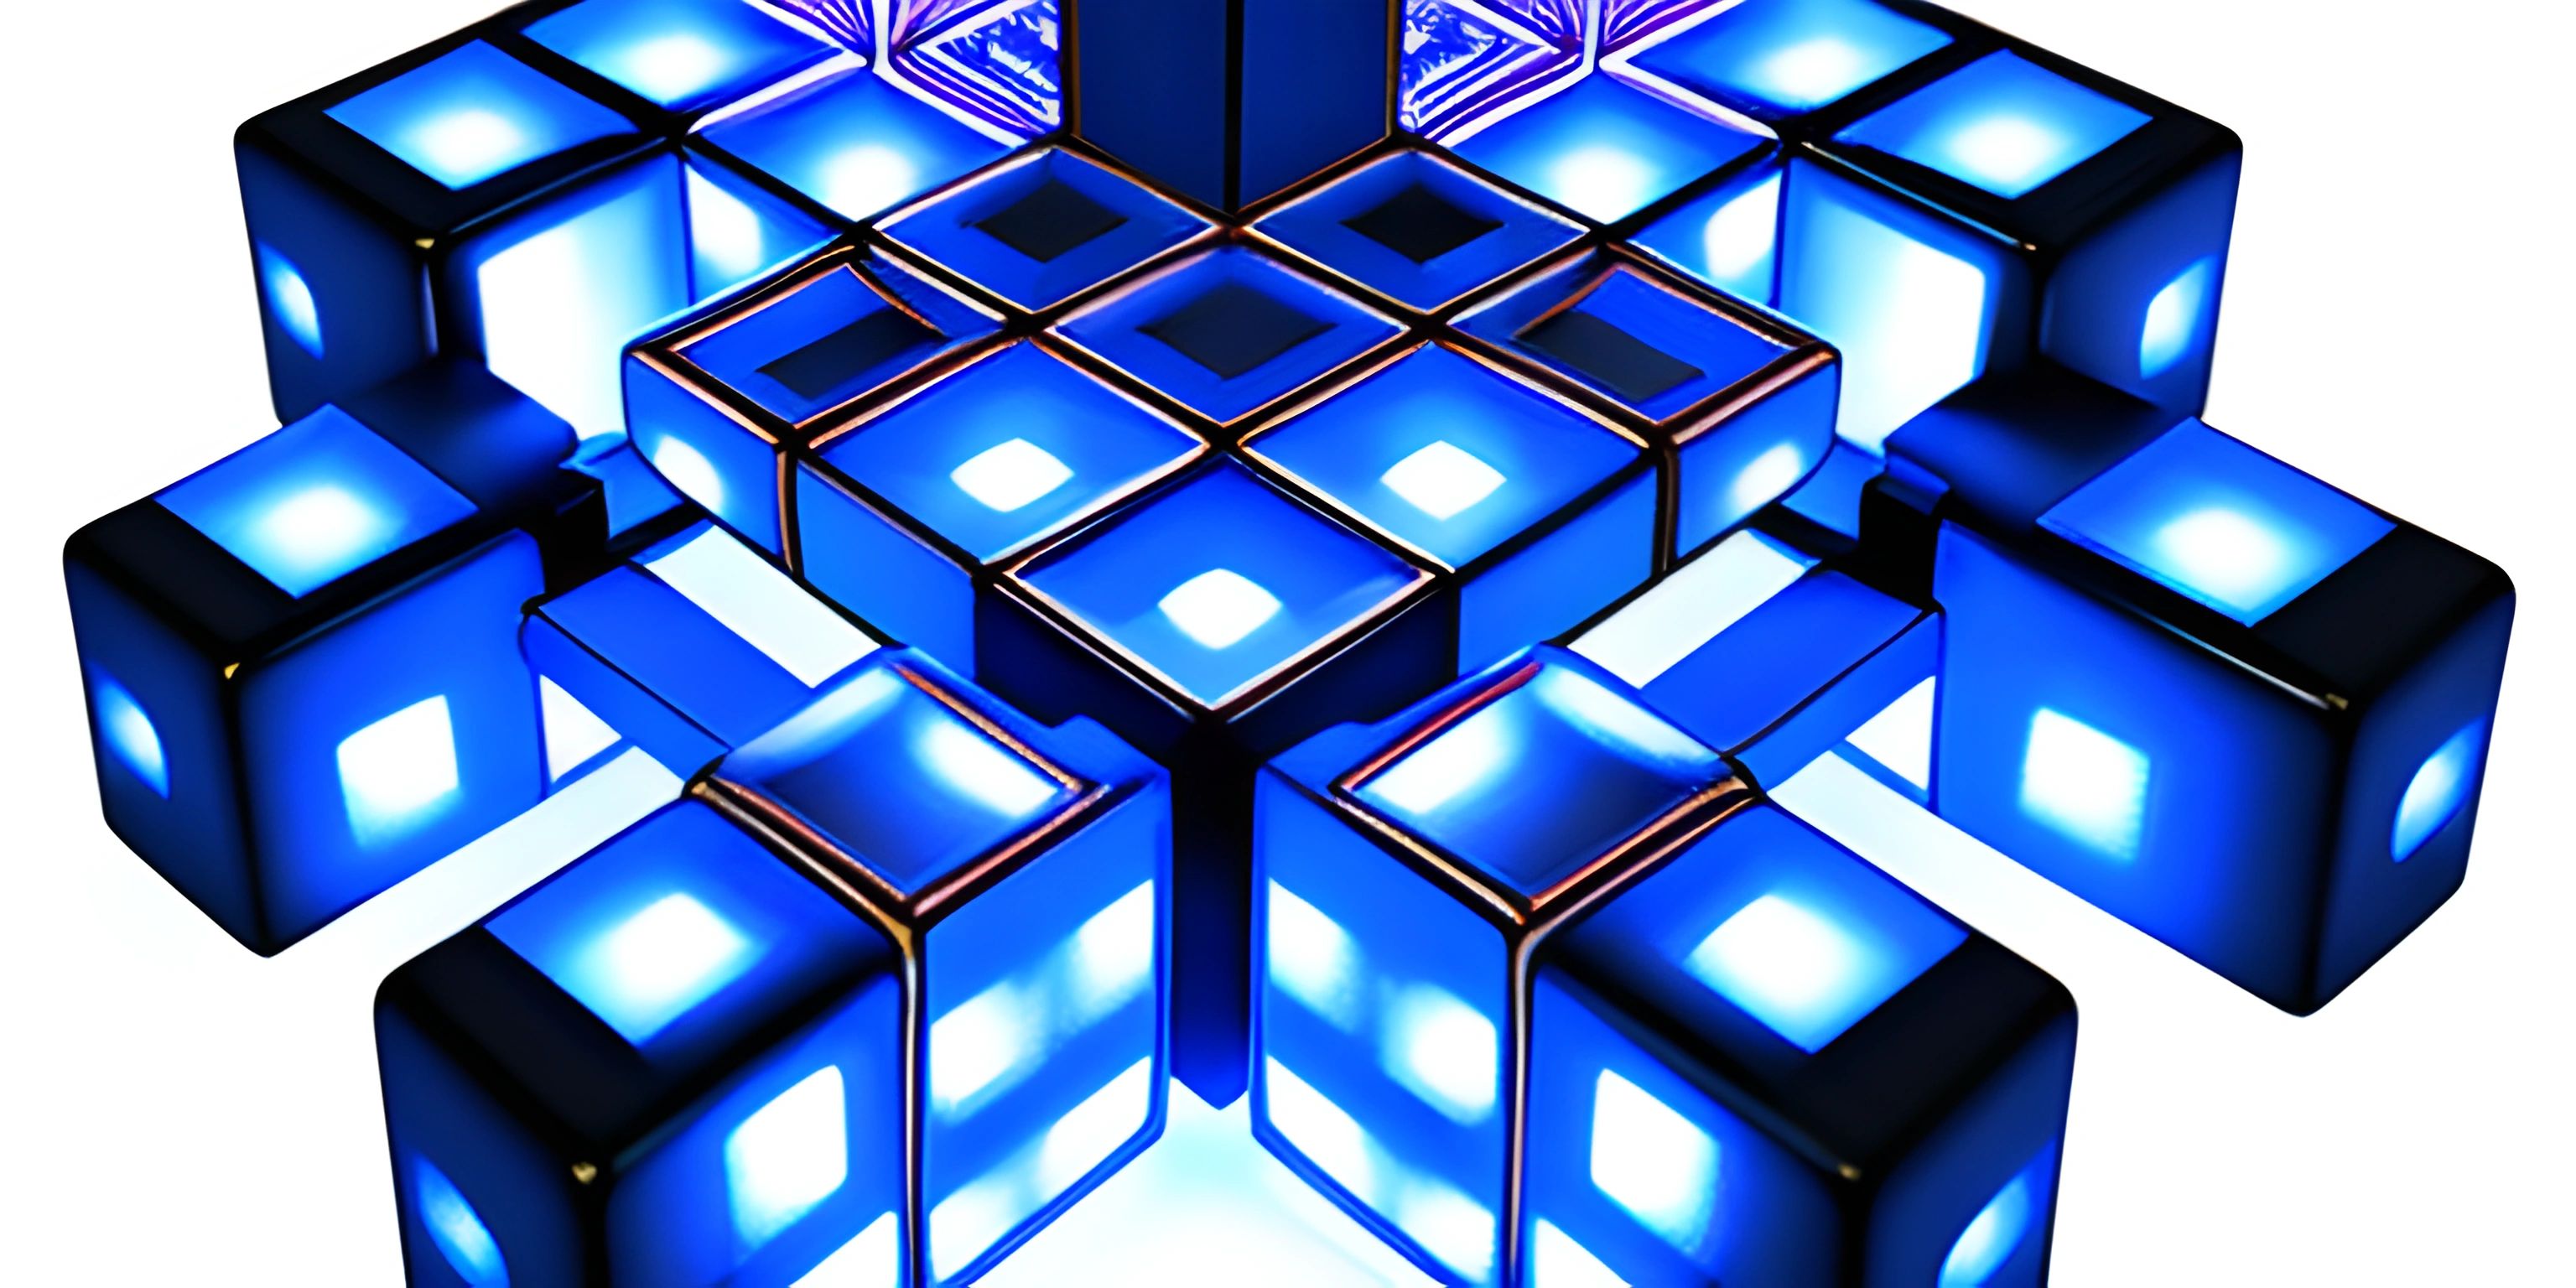 a bright, blue digital light design shows an image of a blue and purple block design that resembles a maze of blocks